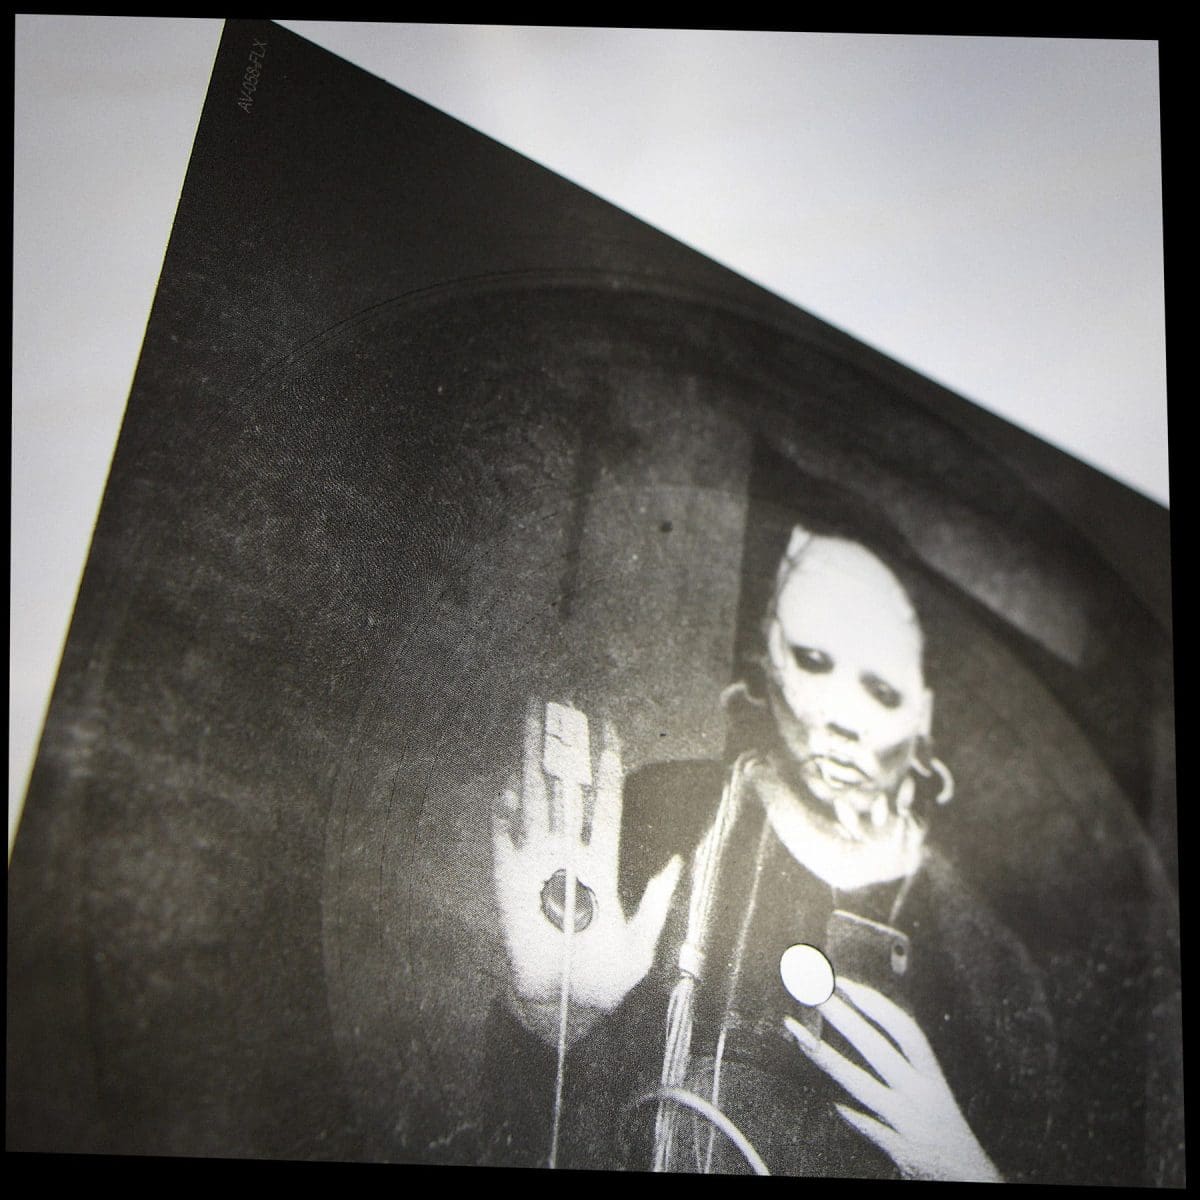 Sopor Aeternus & the Ensemble of Shadows' "dead Lovers' Sarabande" (face One + Face Two) Re-released As a Very Limited 2x 2lp Vinyl Set - Get Your Copy Now